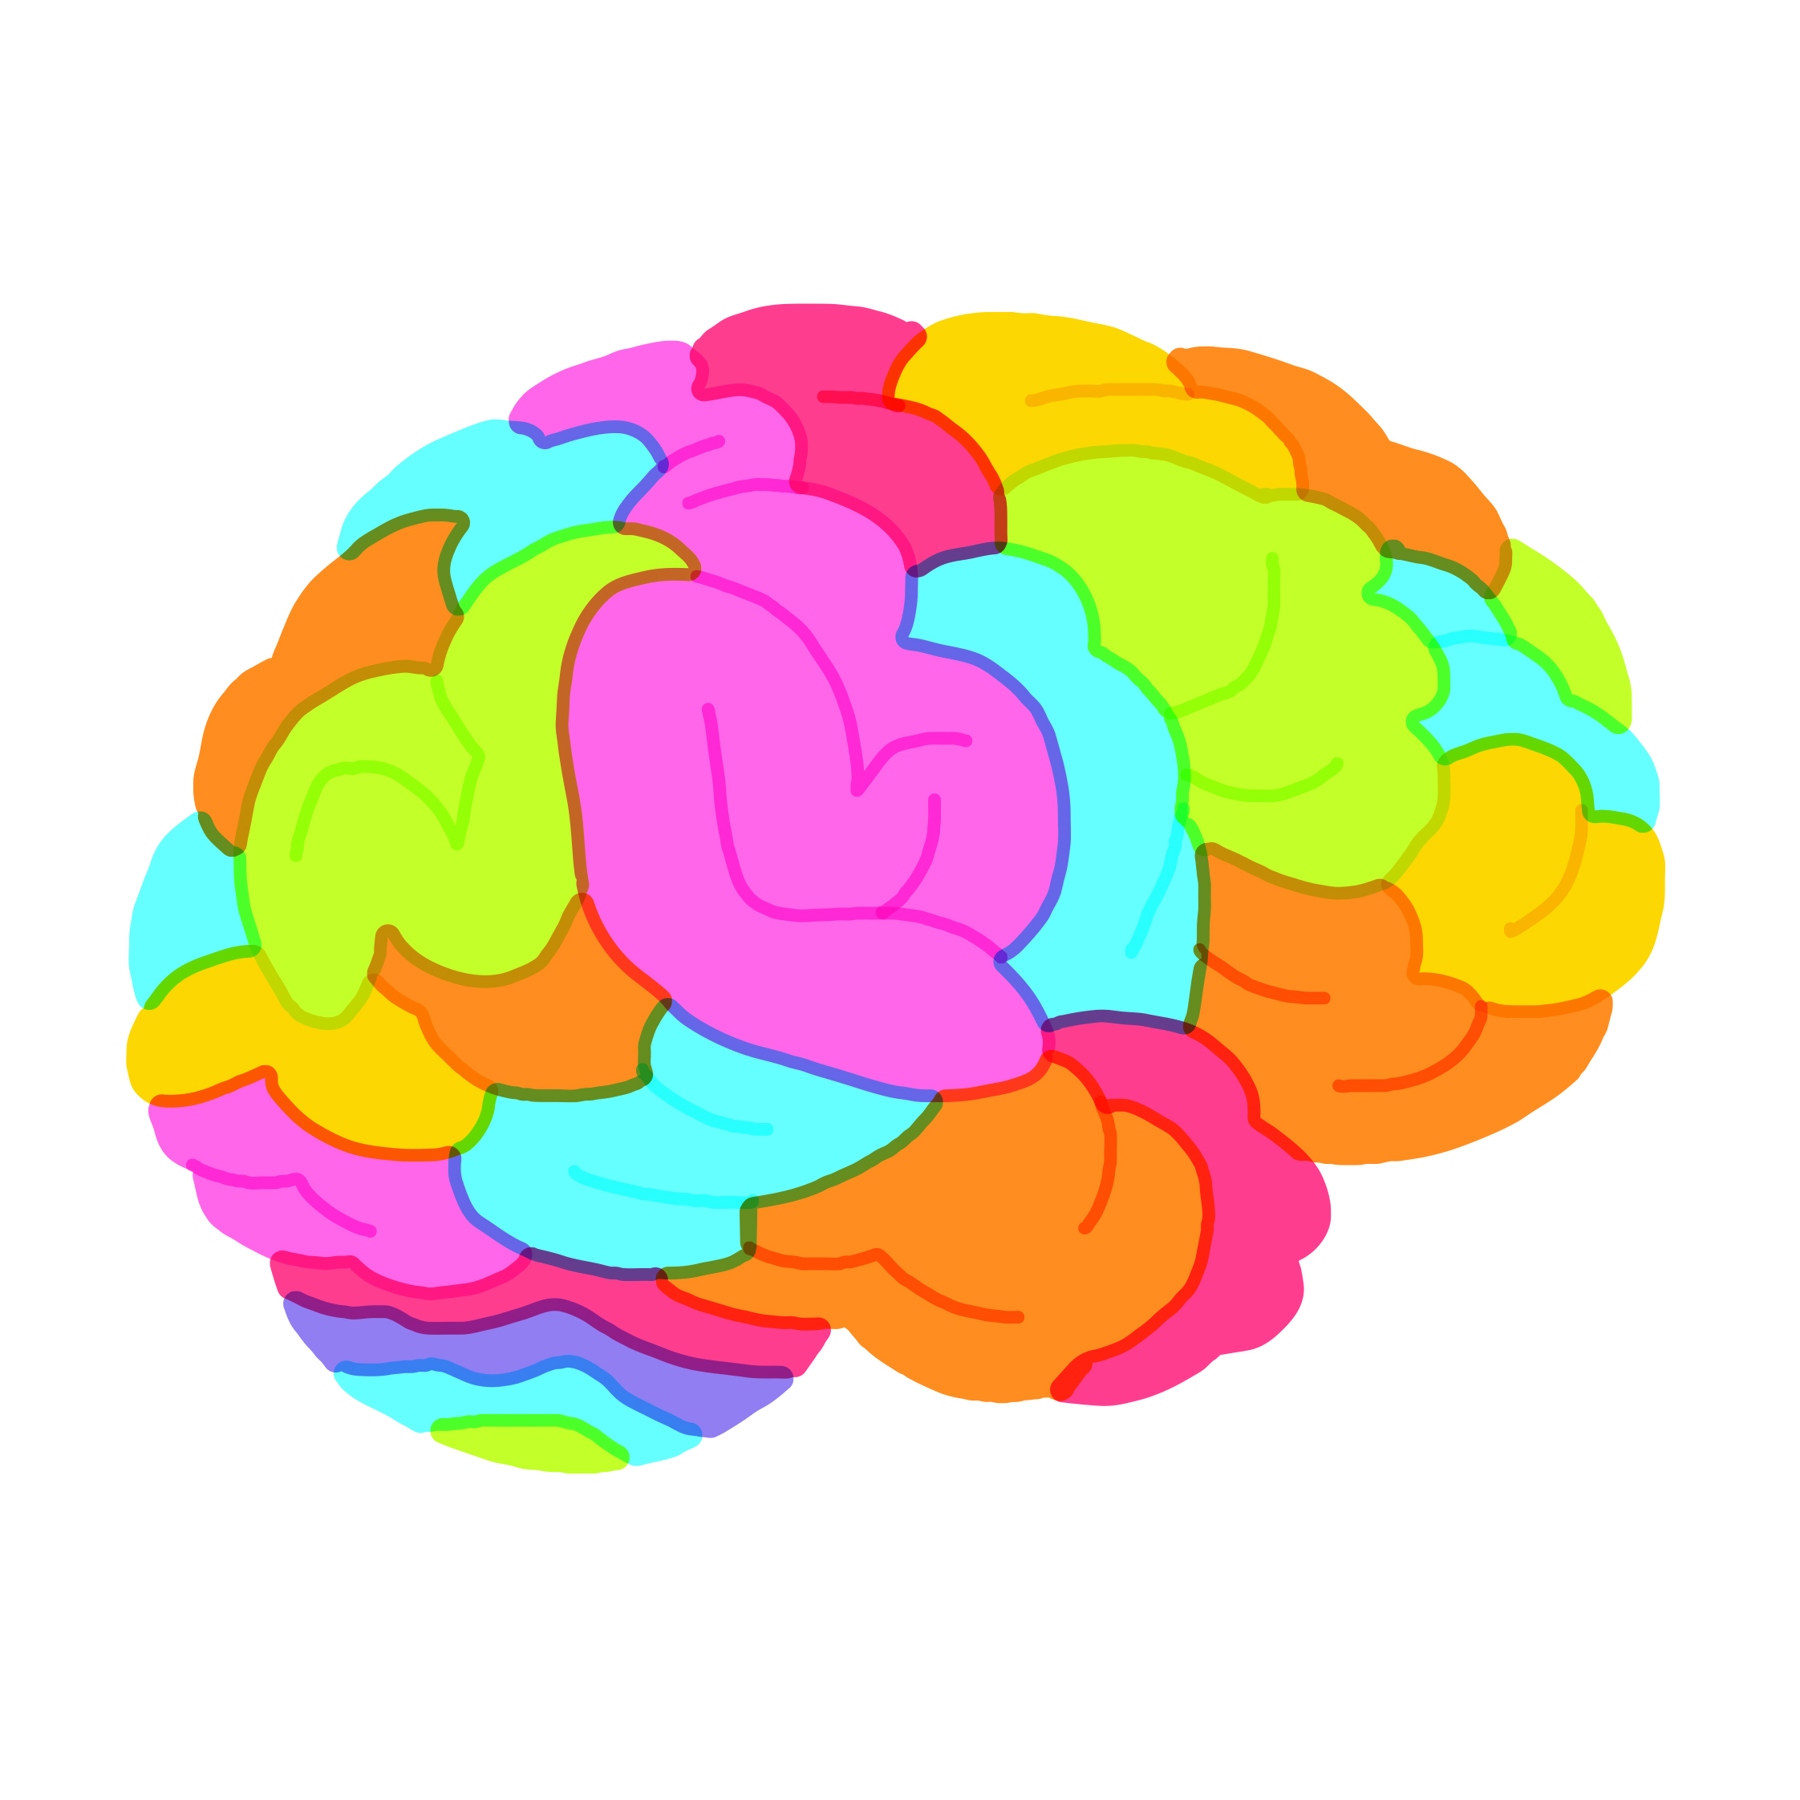 Illustration of brain with multiple colours